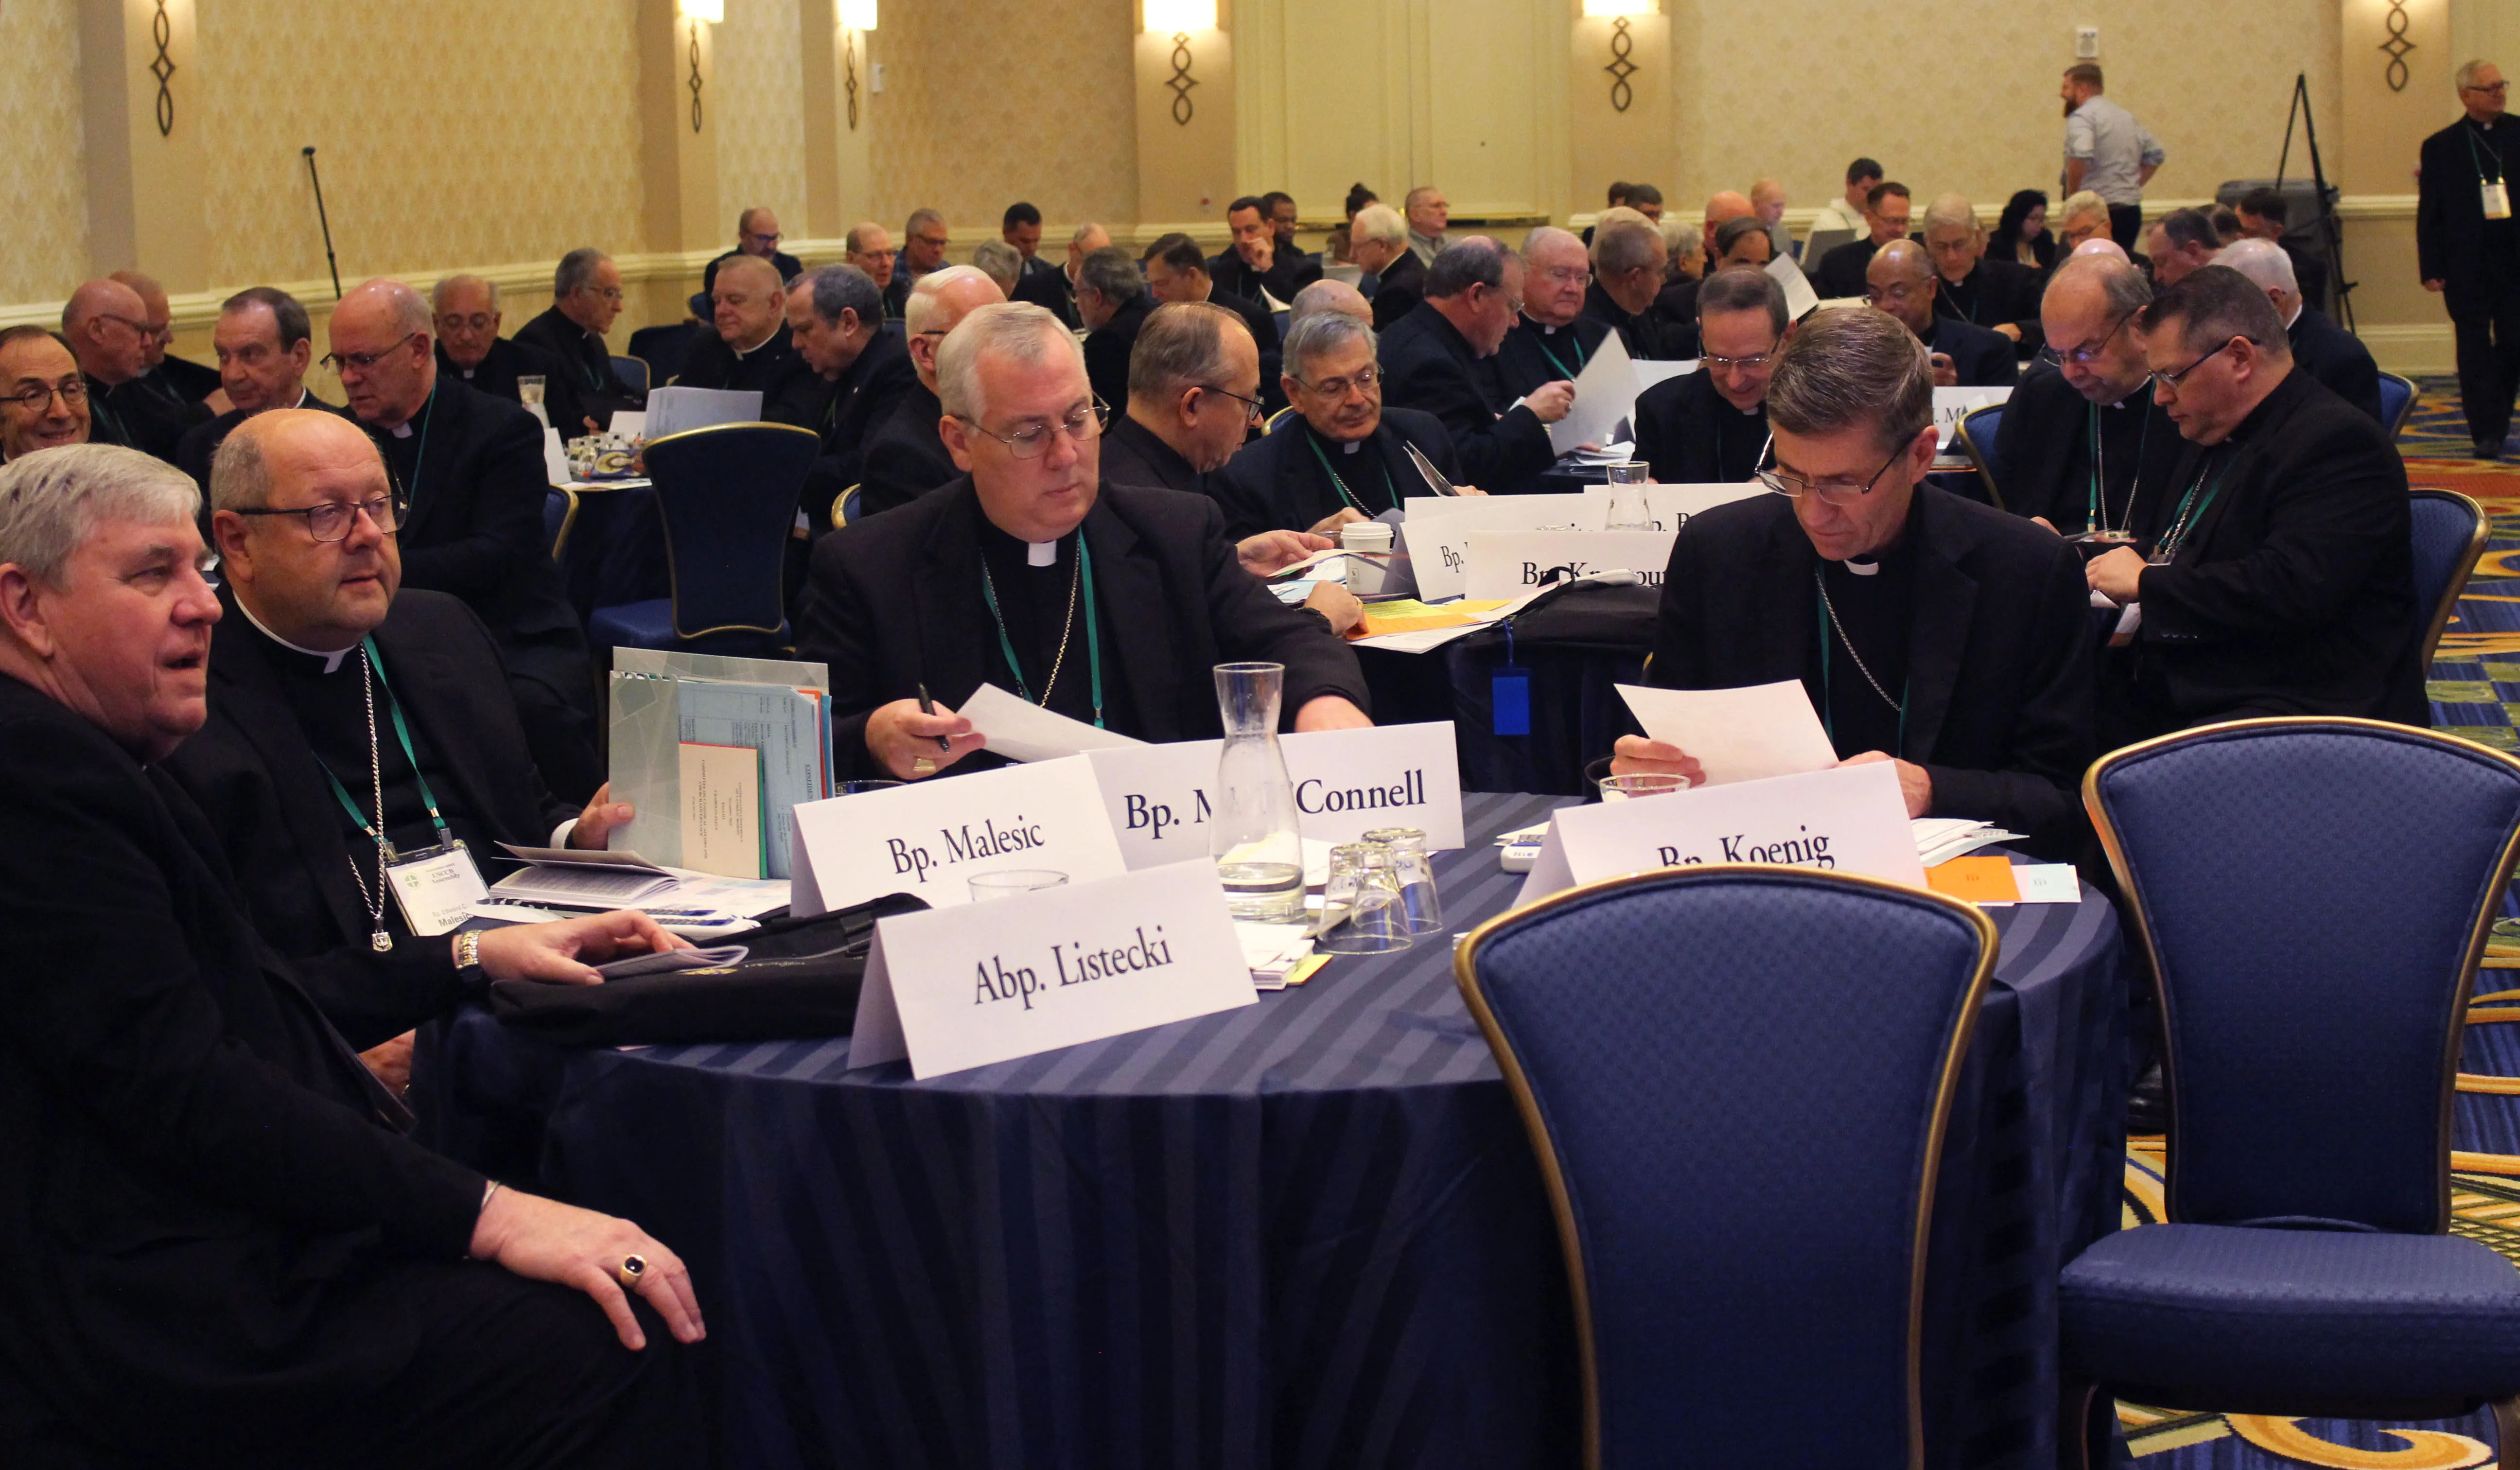 The U.S. bishops met in Baltimore for their annual fall general assembly on Nov. 14-17, 2022.?w=200&h=150